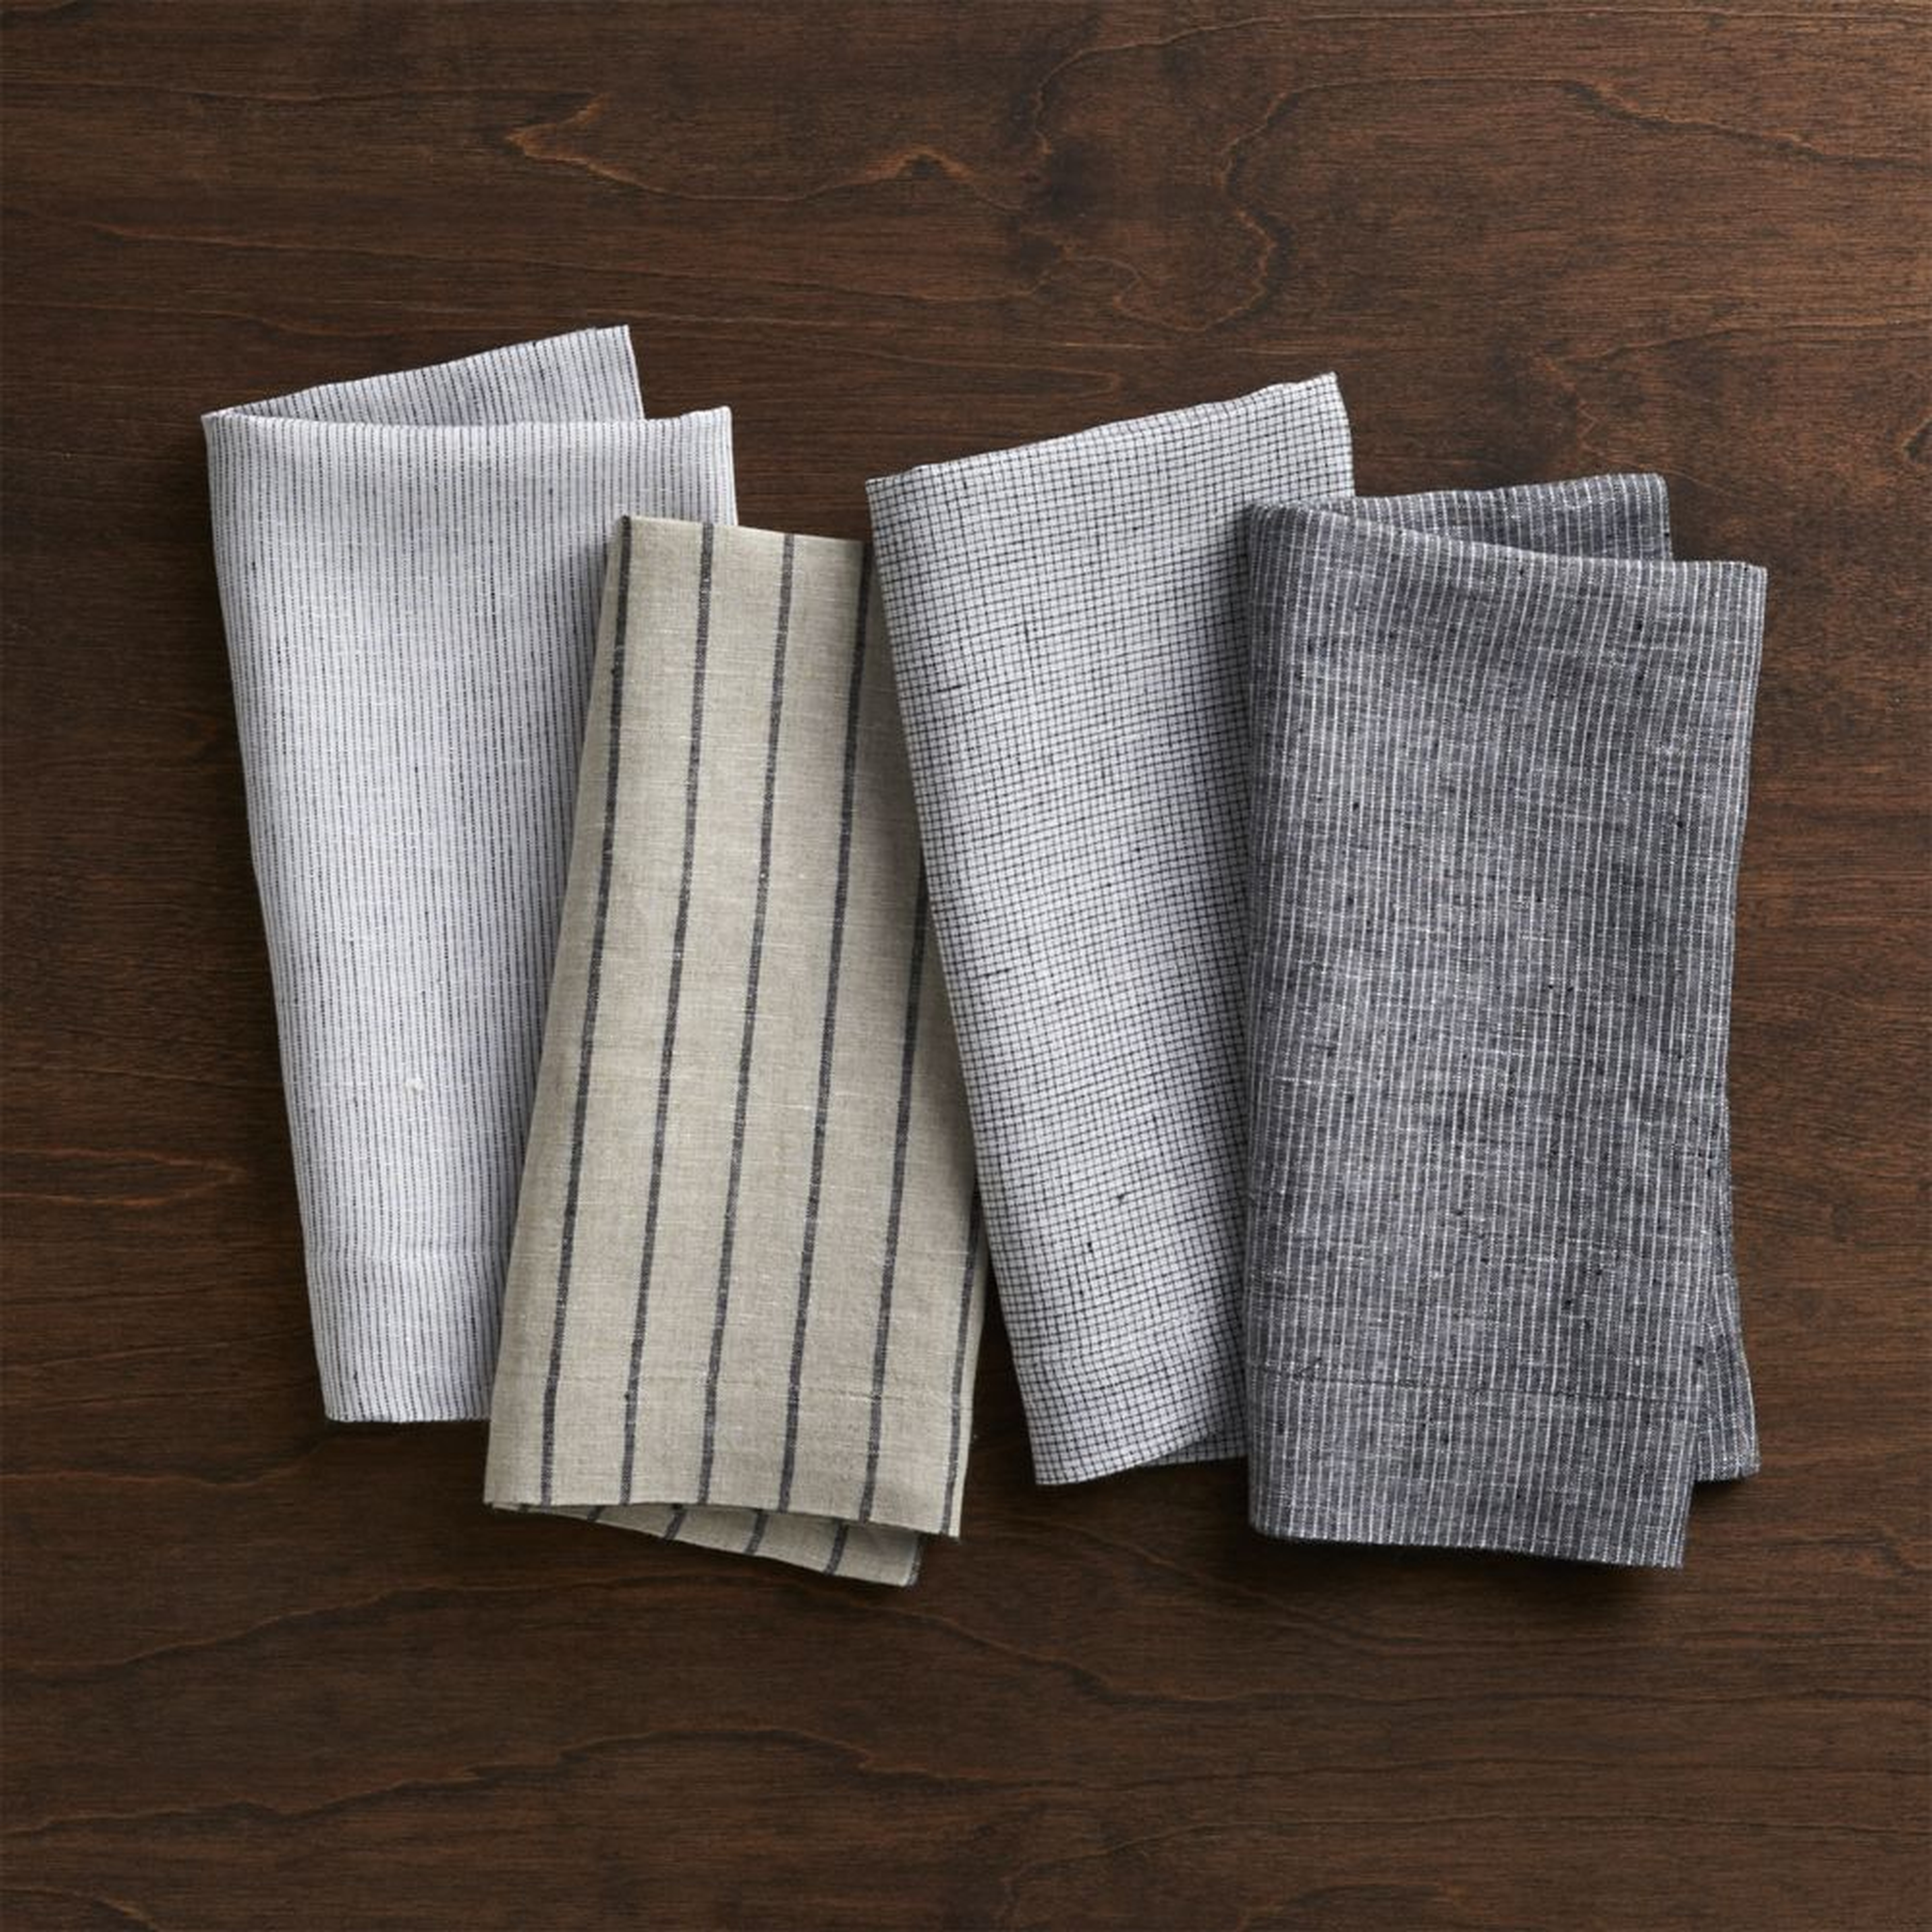 Suits Linen Cloth Dinner Napkins, Set of 4 - Crate and Barrel